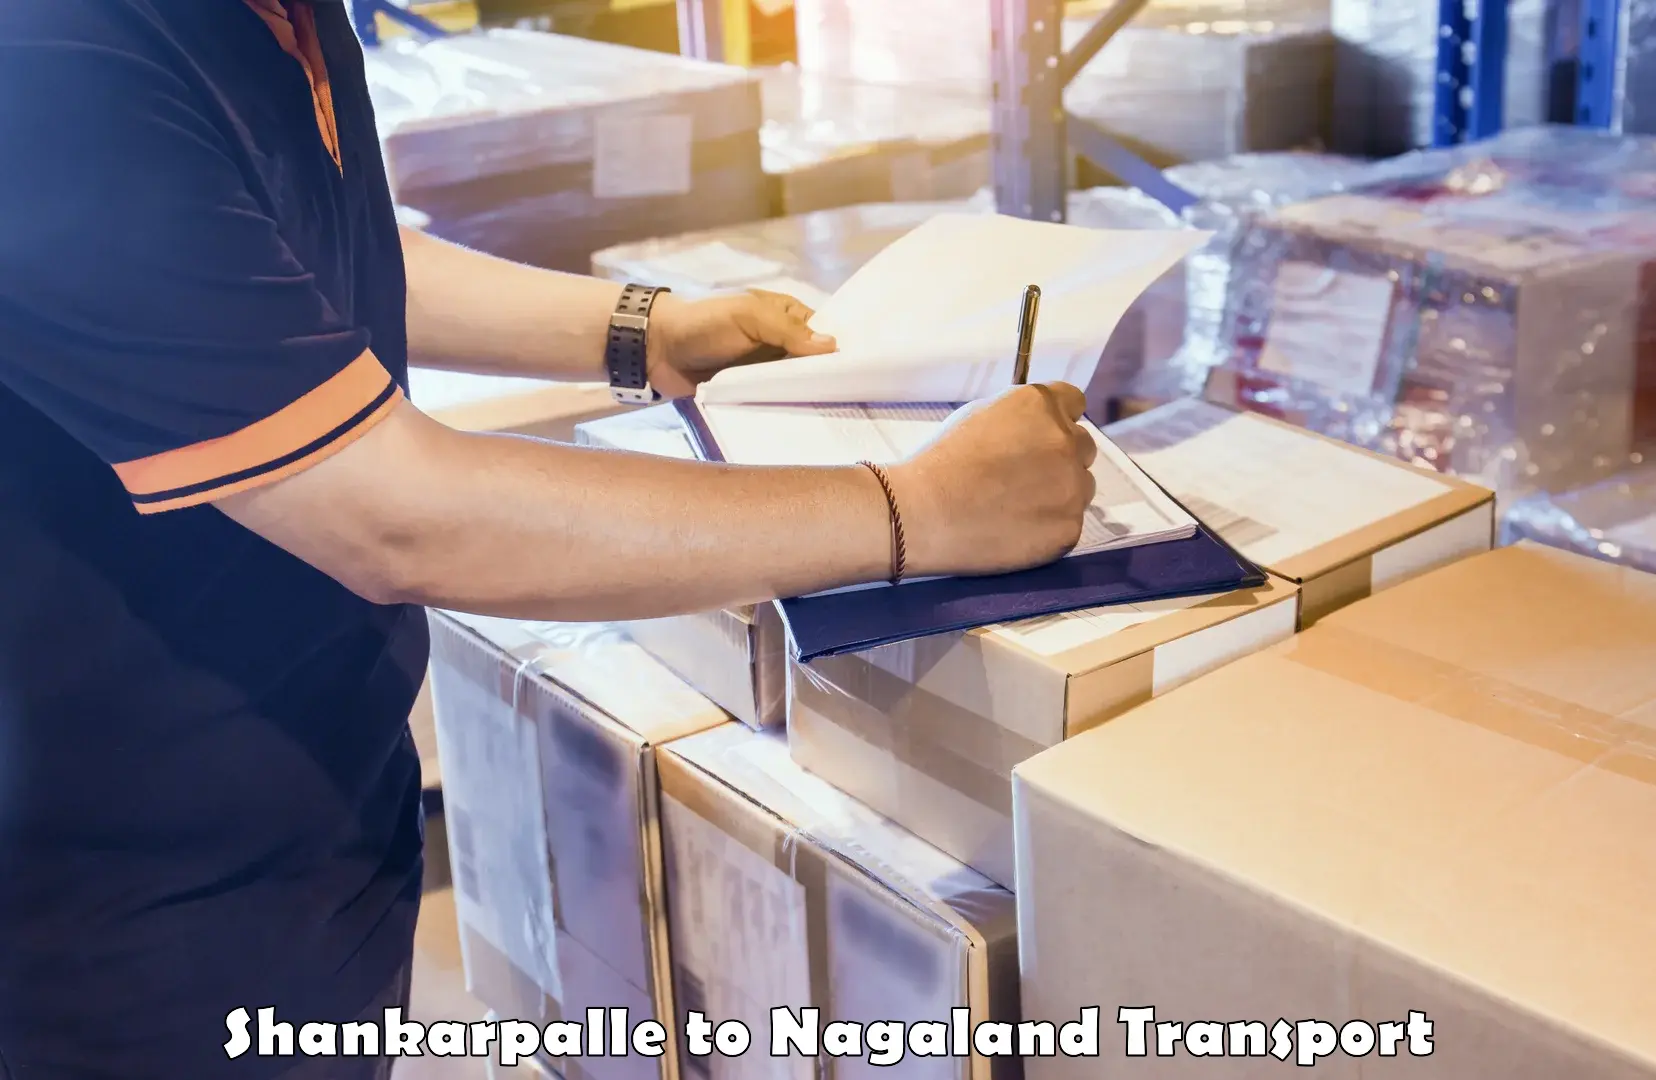 Two wheeler parcel service Shankarpalle to Nagaland